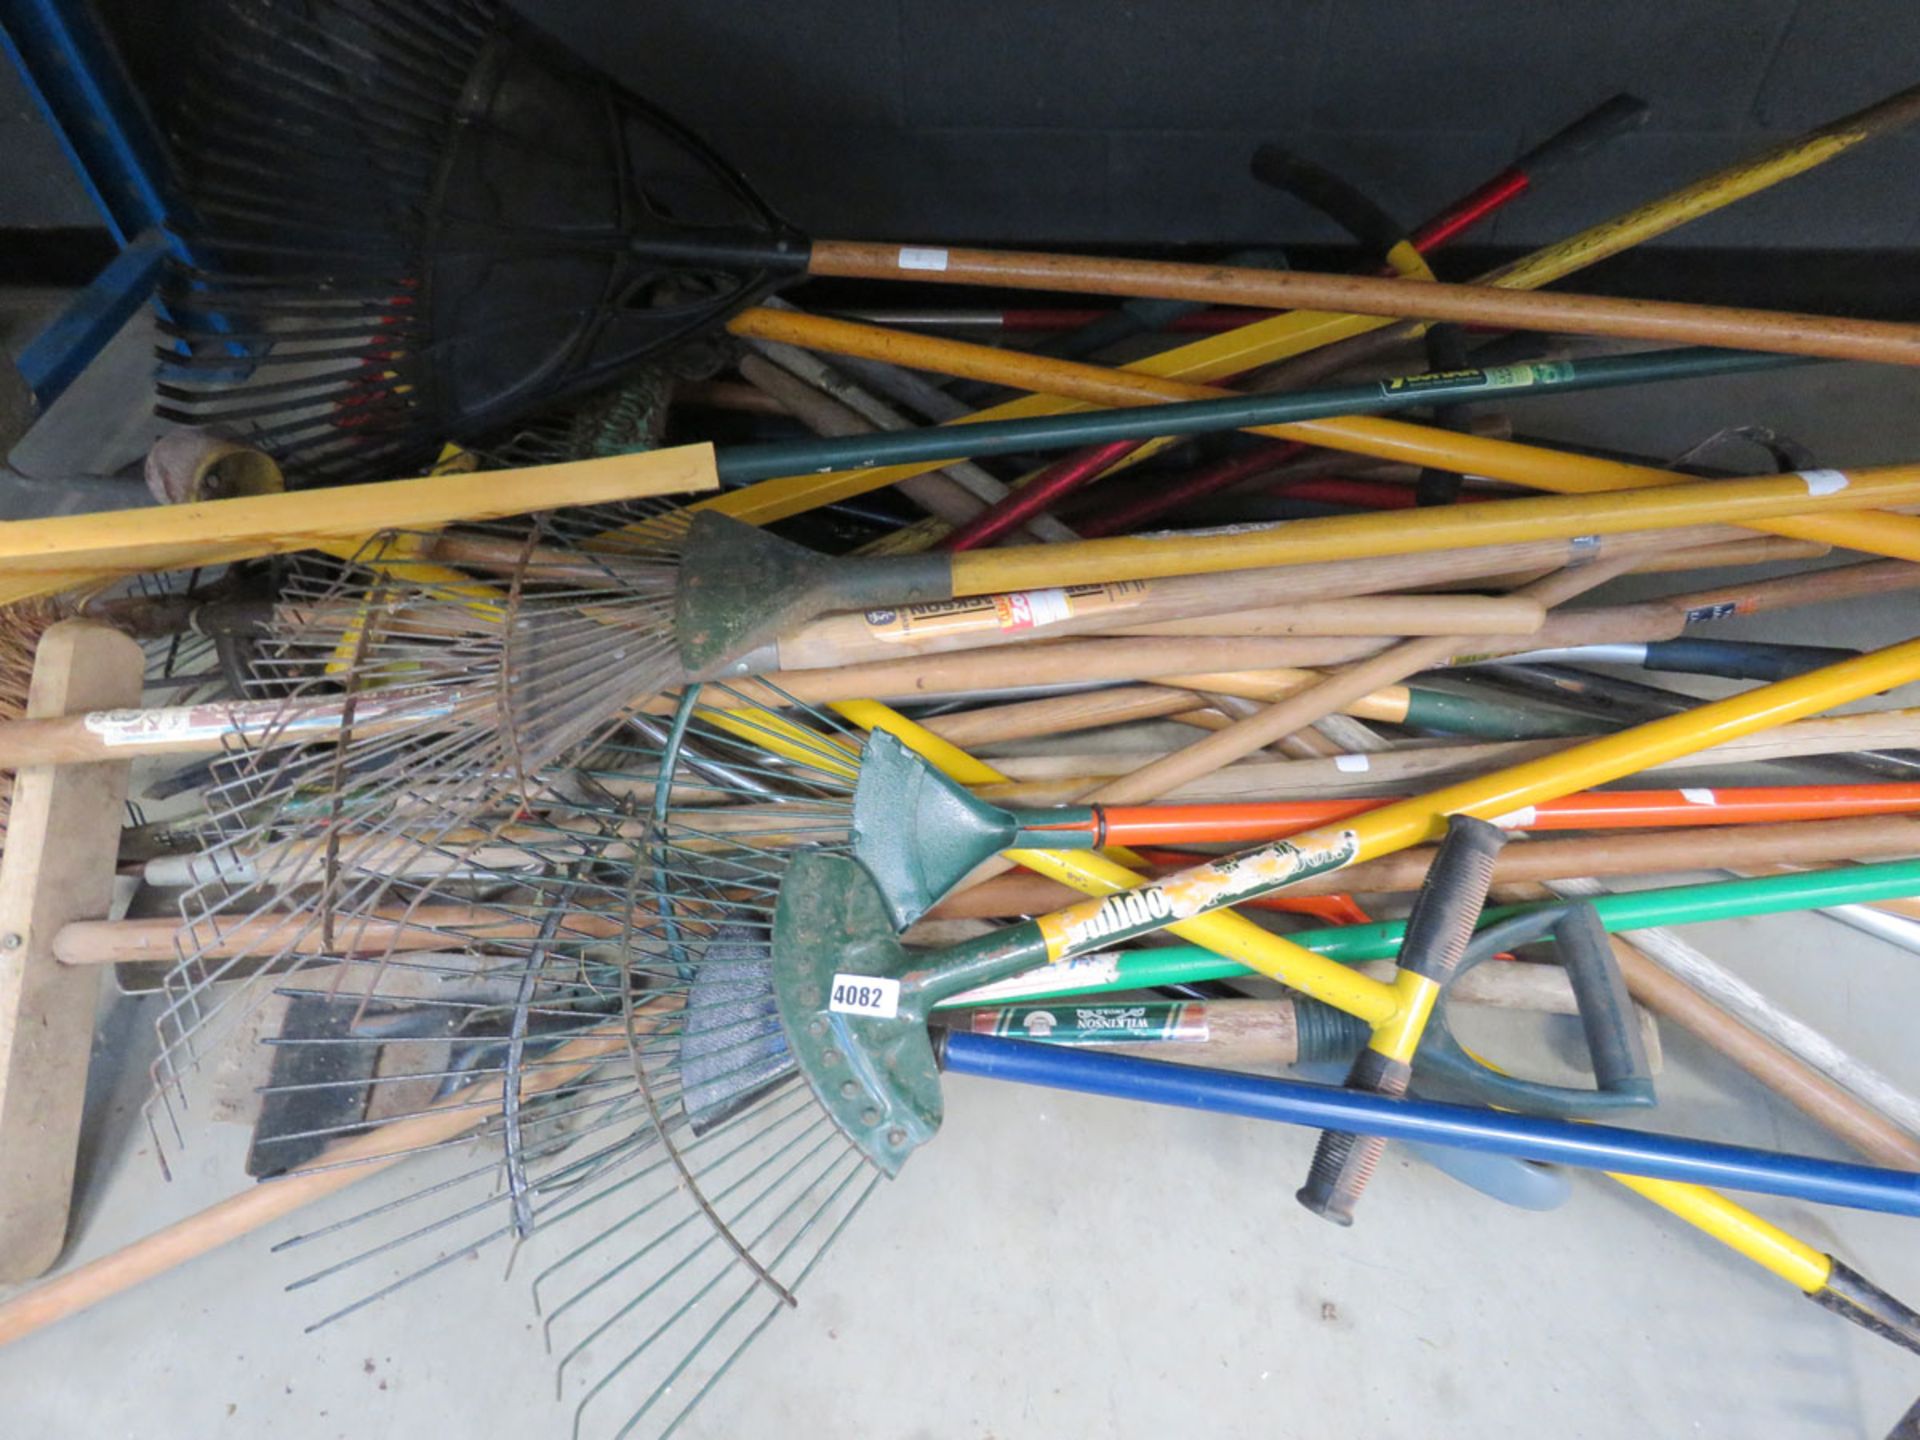 Large under bay of garden tools - Image 2 of 2